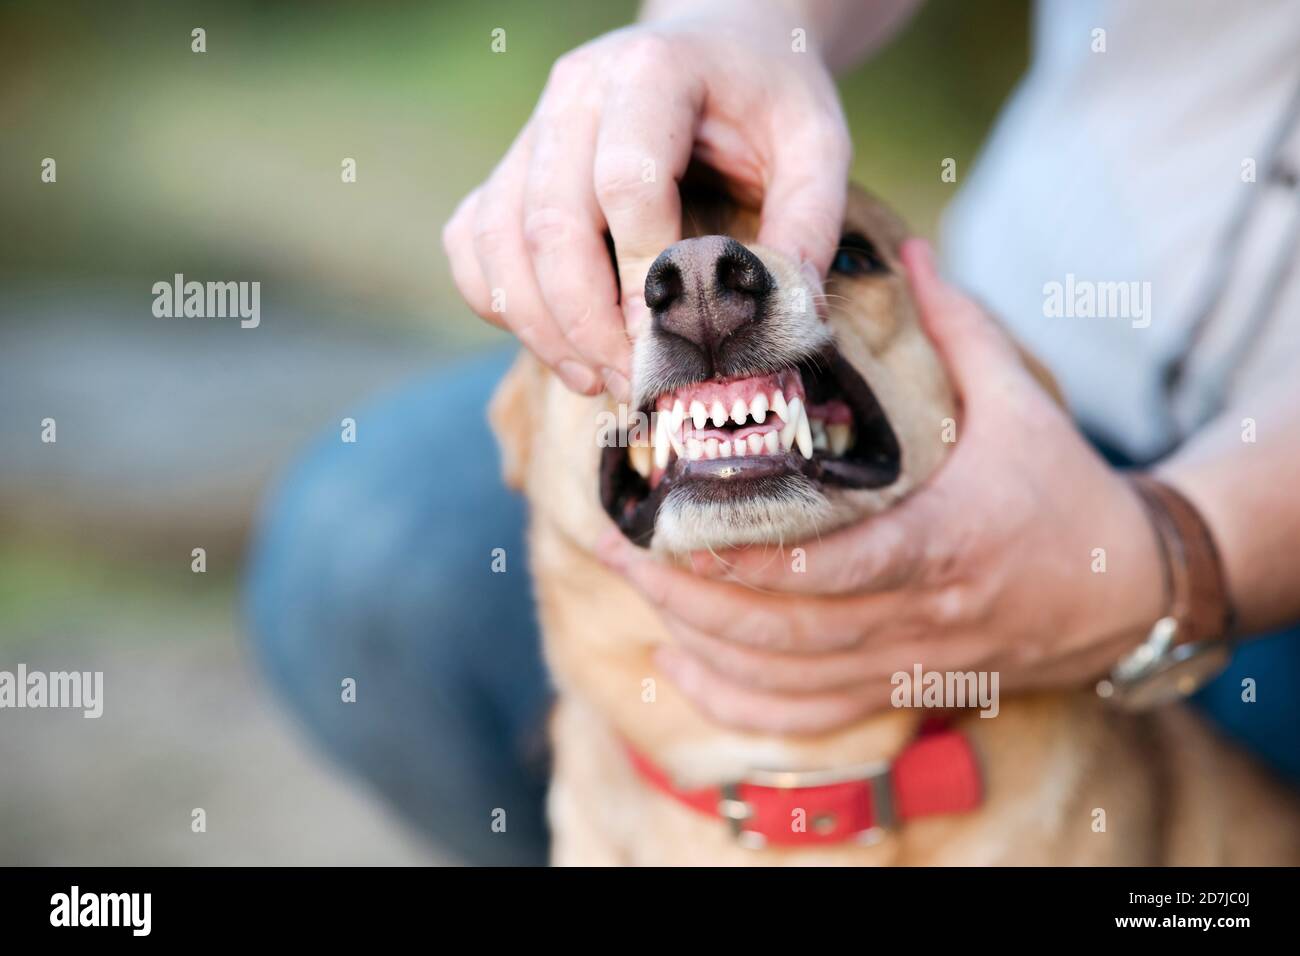 Midsection of man showing dog teeth Stock Photo